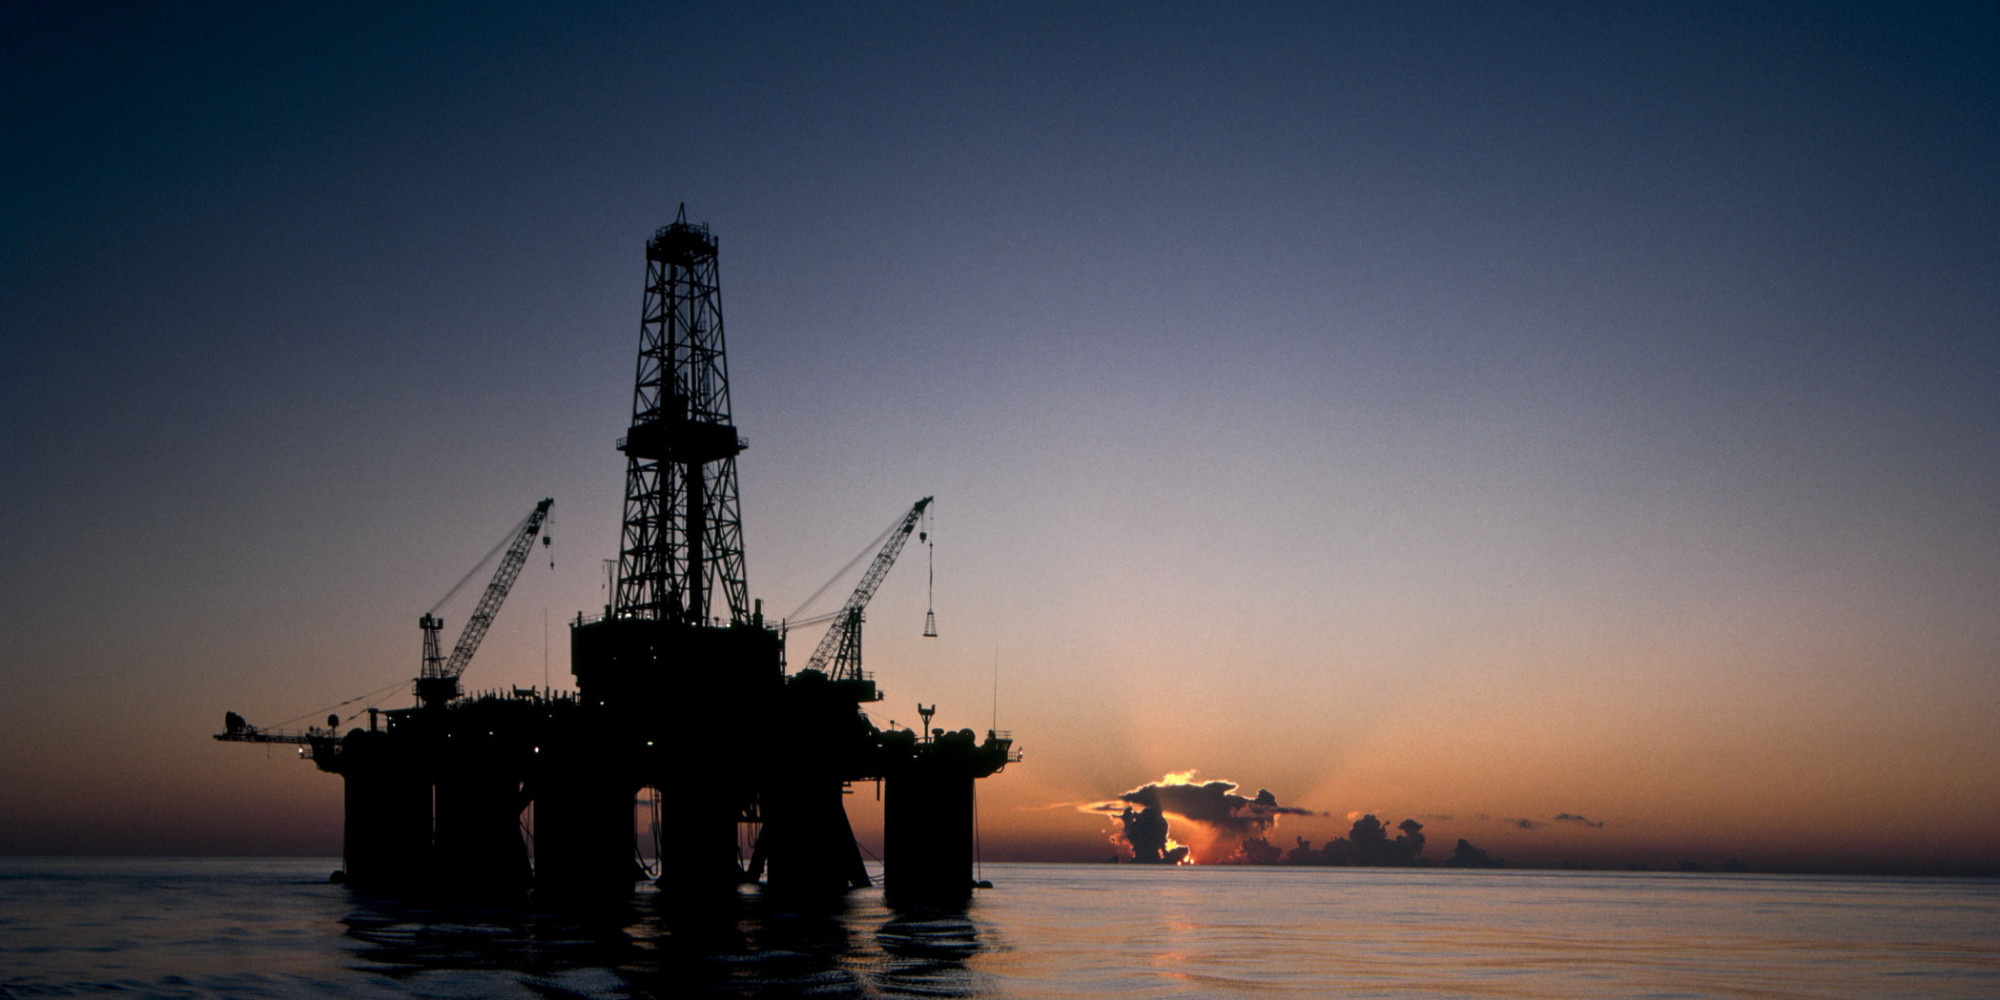 Oil Rig Explosion In Gulf Of Mexico Leaves 1 Dead, 3 Injured HuffPost